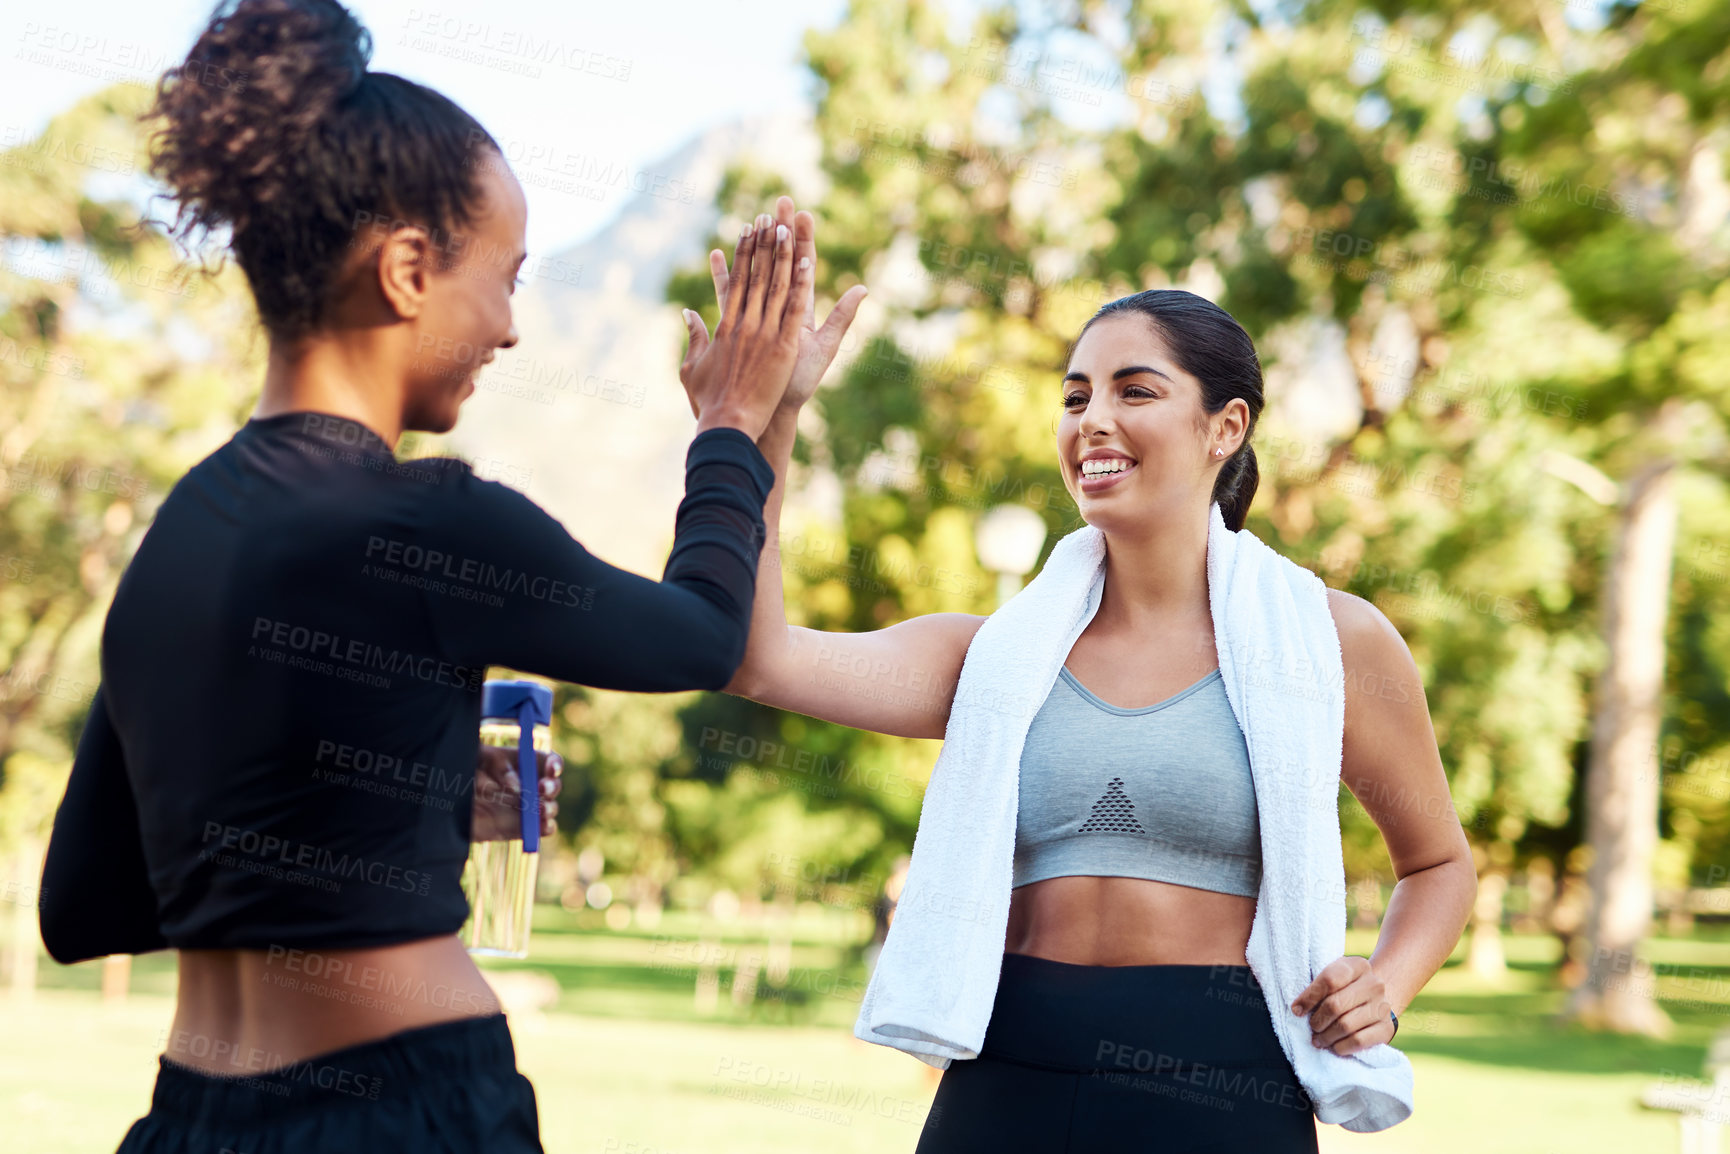 Buy stock photo Cropped shot of two attractive young women giving each other a high-five after their run in the park